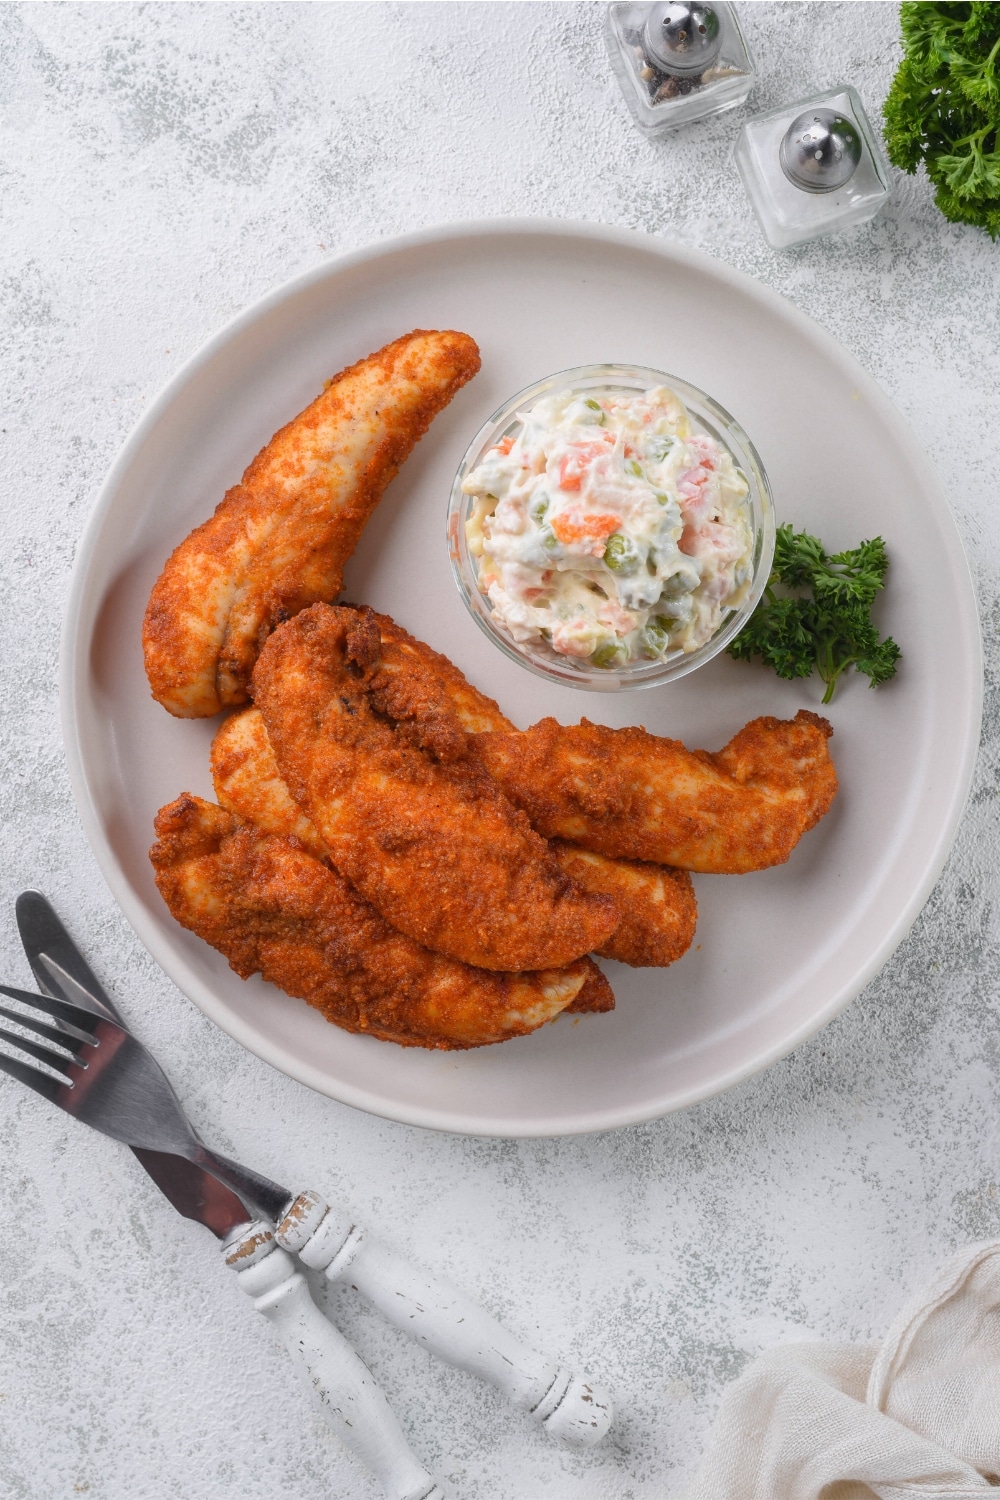 Top view of baked chicken tenders on a plate served with a small bowl of creamy potato salad.